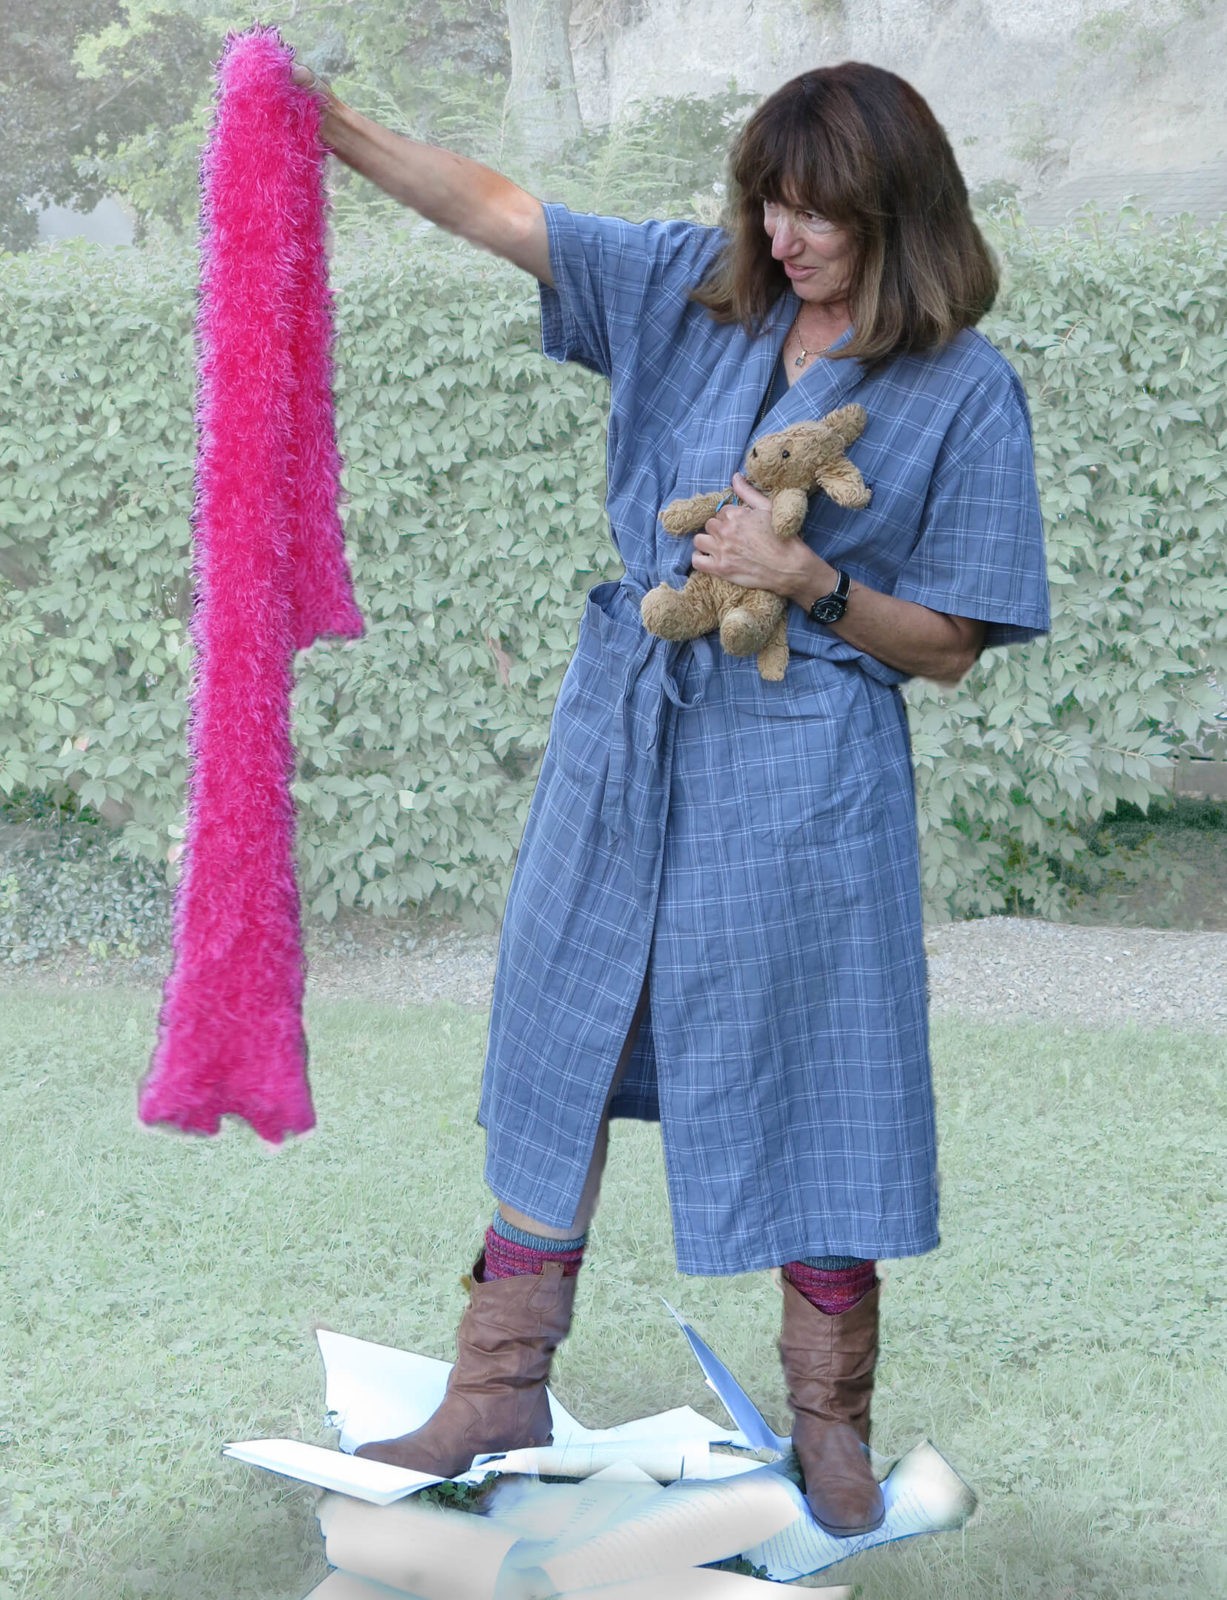 In Ithaca, New York, Robin Botie unloads fake pink boa. But she keeps her daughter's old cowboy boots that give her courage to send off her manuscript.